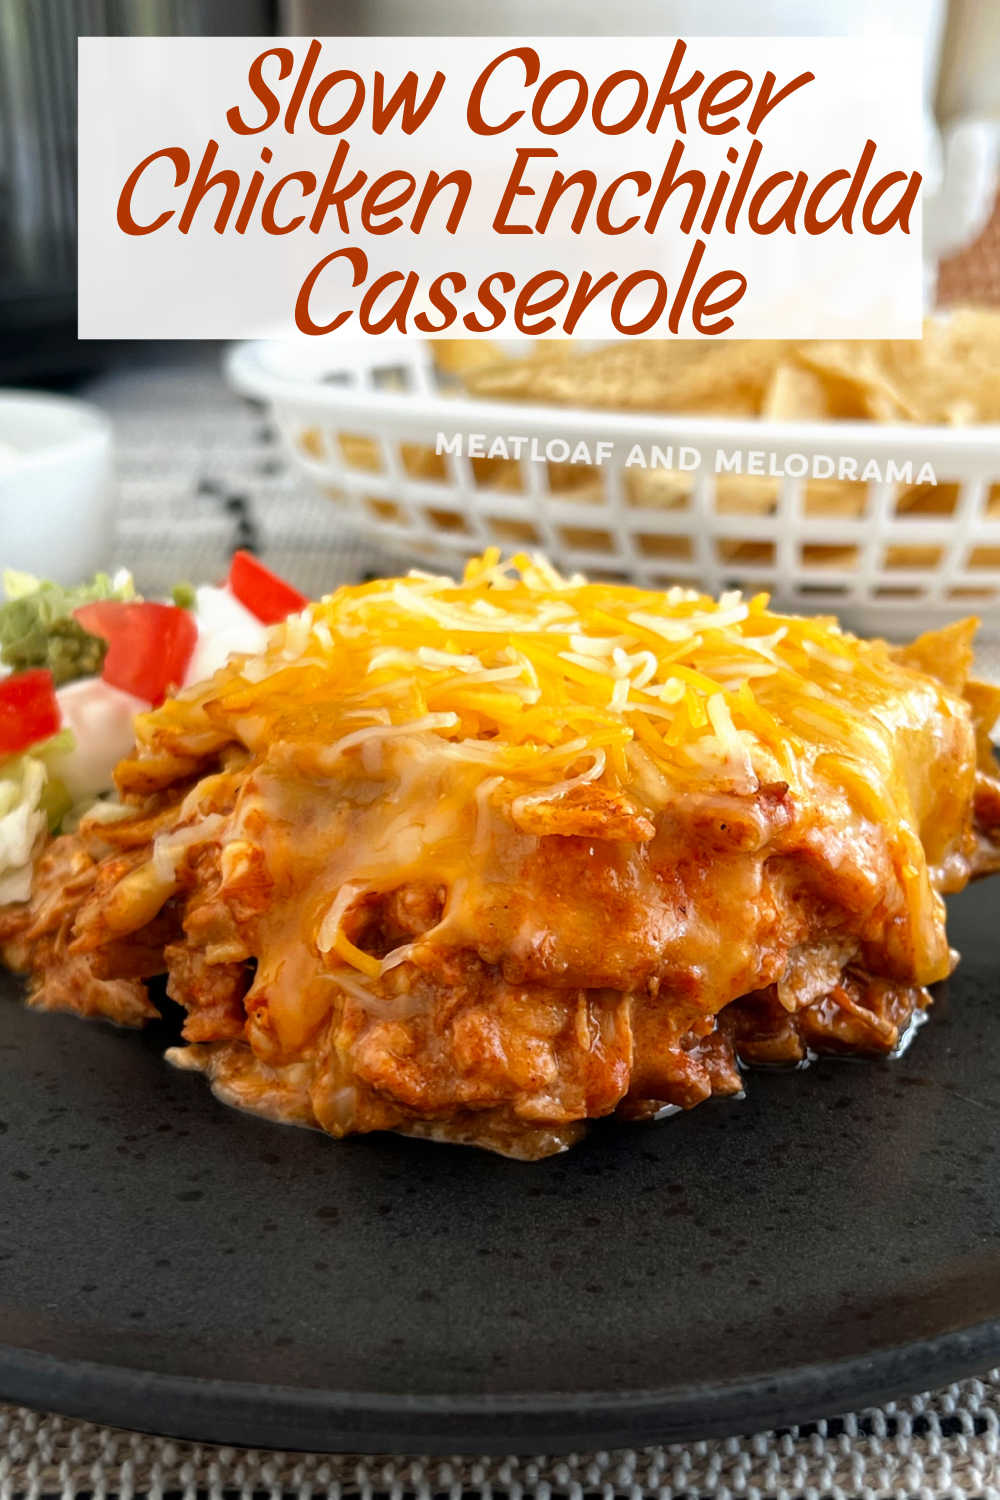 Slow Cooker Chicken Enchilada Casserole is an easy recipe with chicken, red enchilada sauce, cheese and corn tortillas made in the crock pot. The whole family will love this crockpot enchilada casserole for dinner! via @meamel